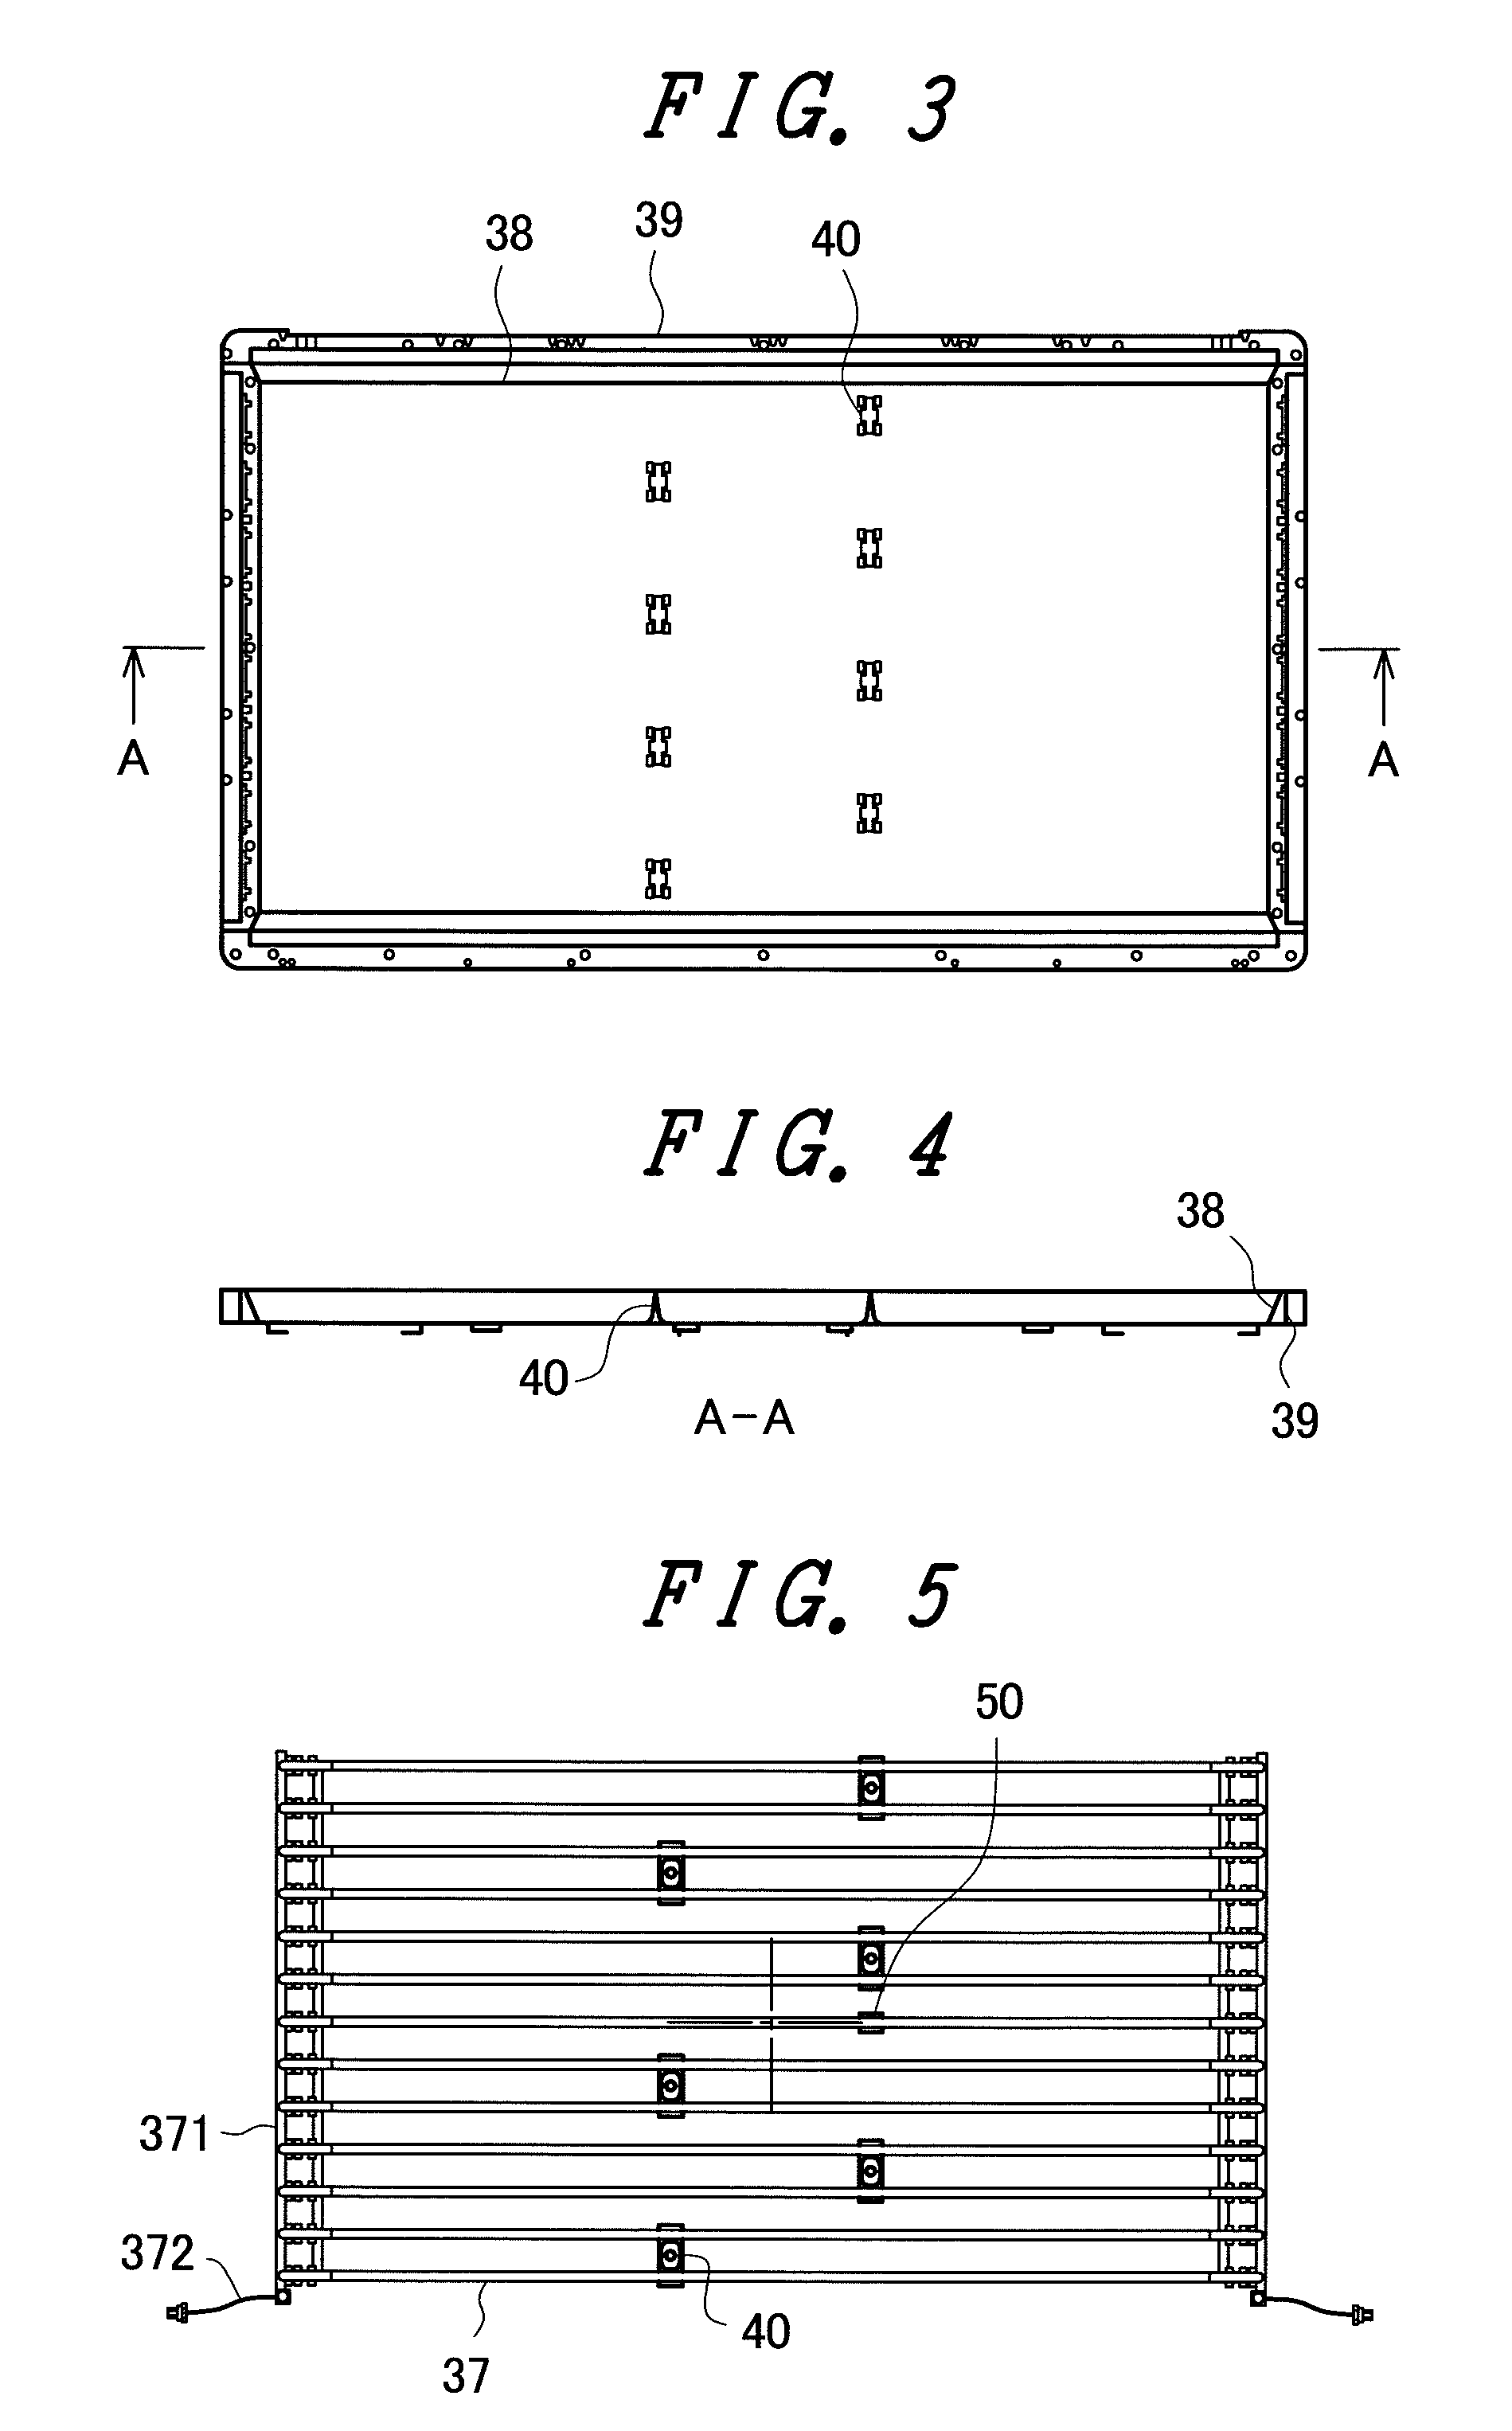 Liquid crystal display device having direct backlight with an odd number of fluorescent lamps providing enhanced brightness at center of screen